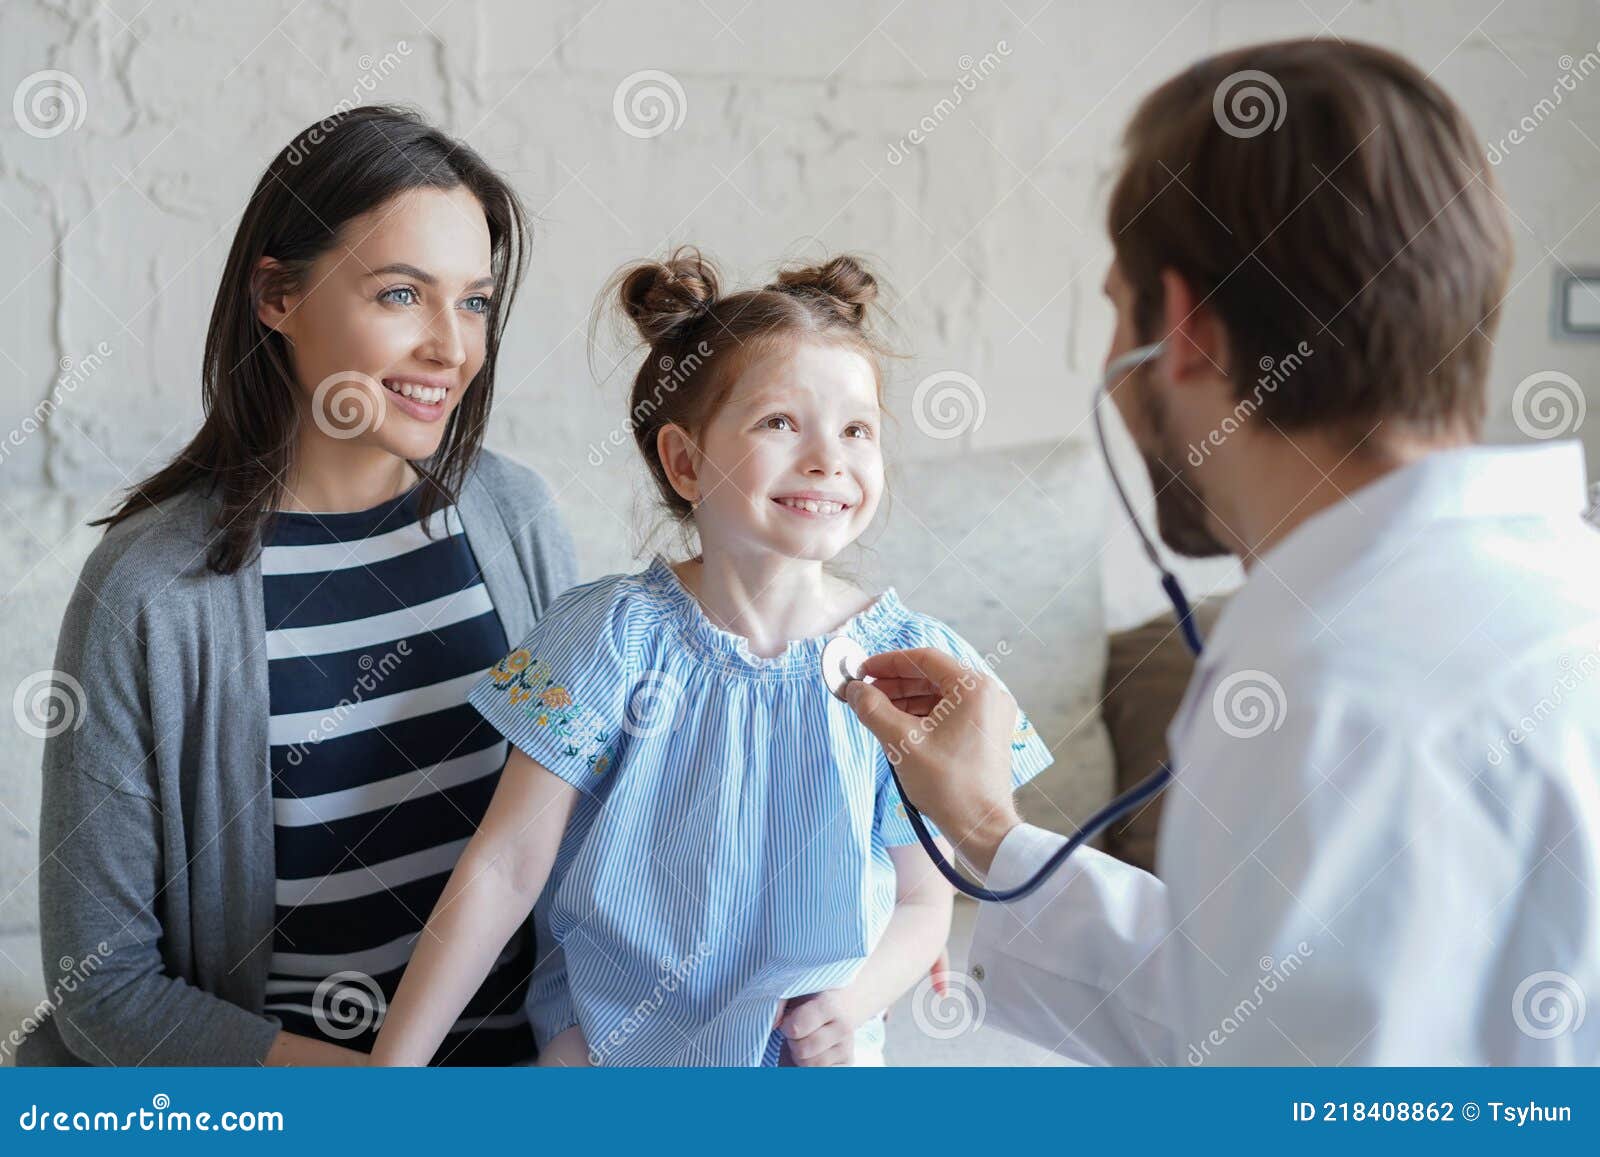 little girl at the doctor for a checkup. doctor auscultate the heartbeat of the child.